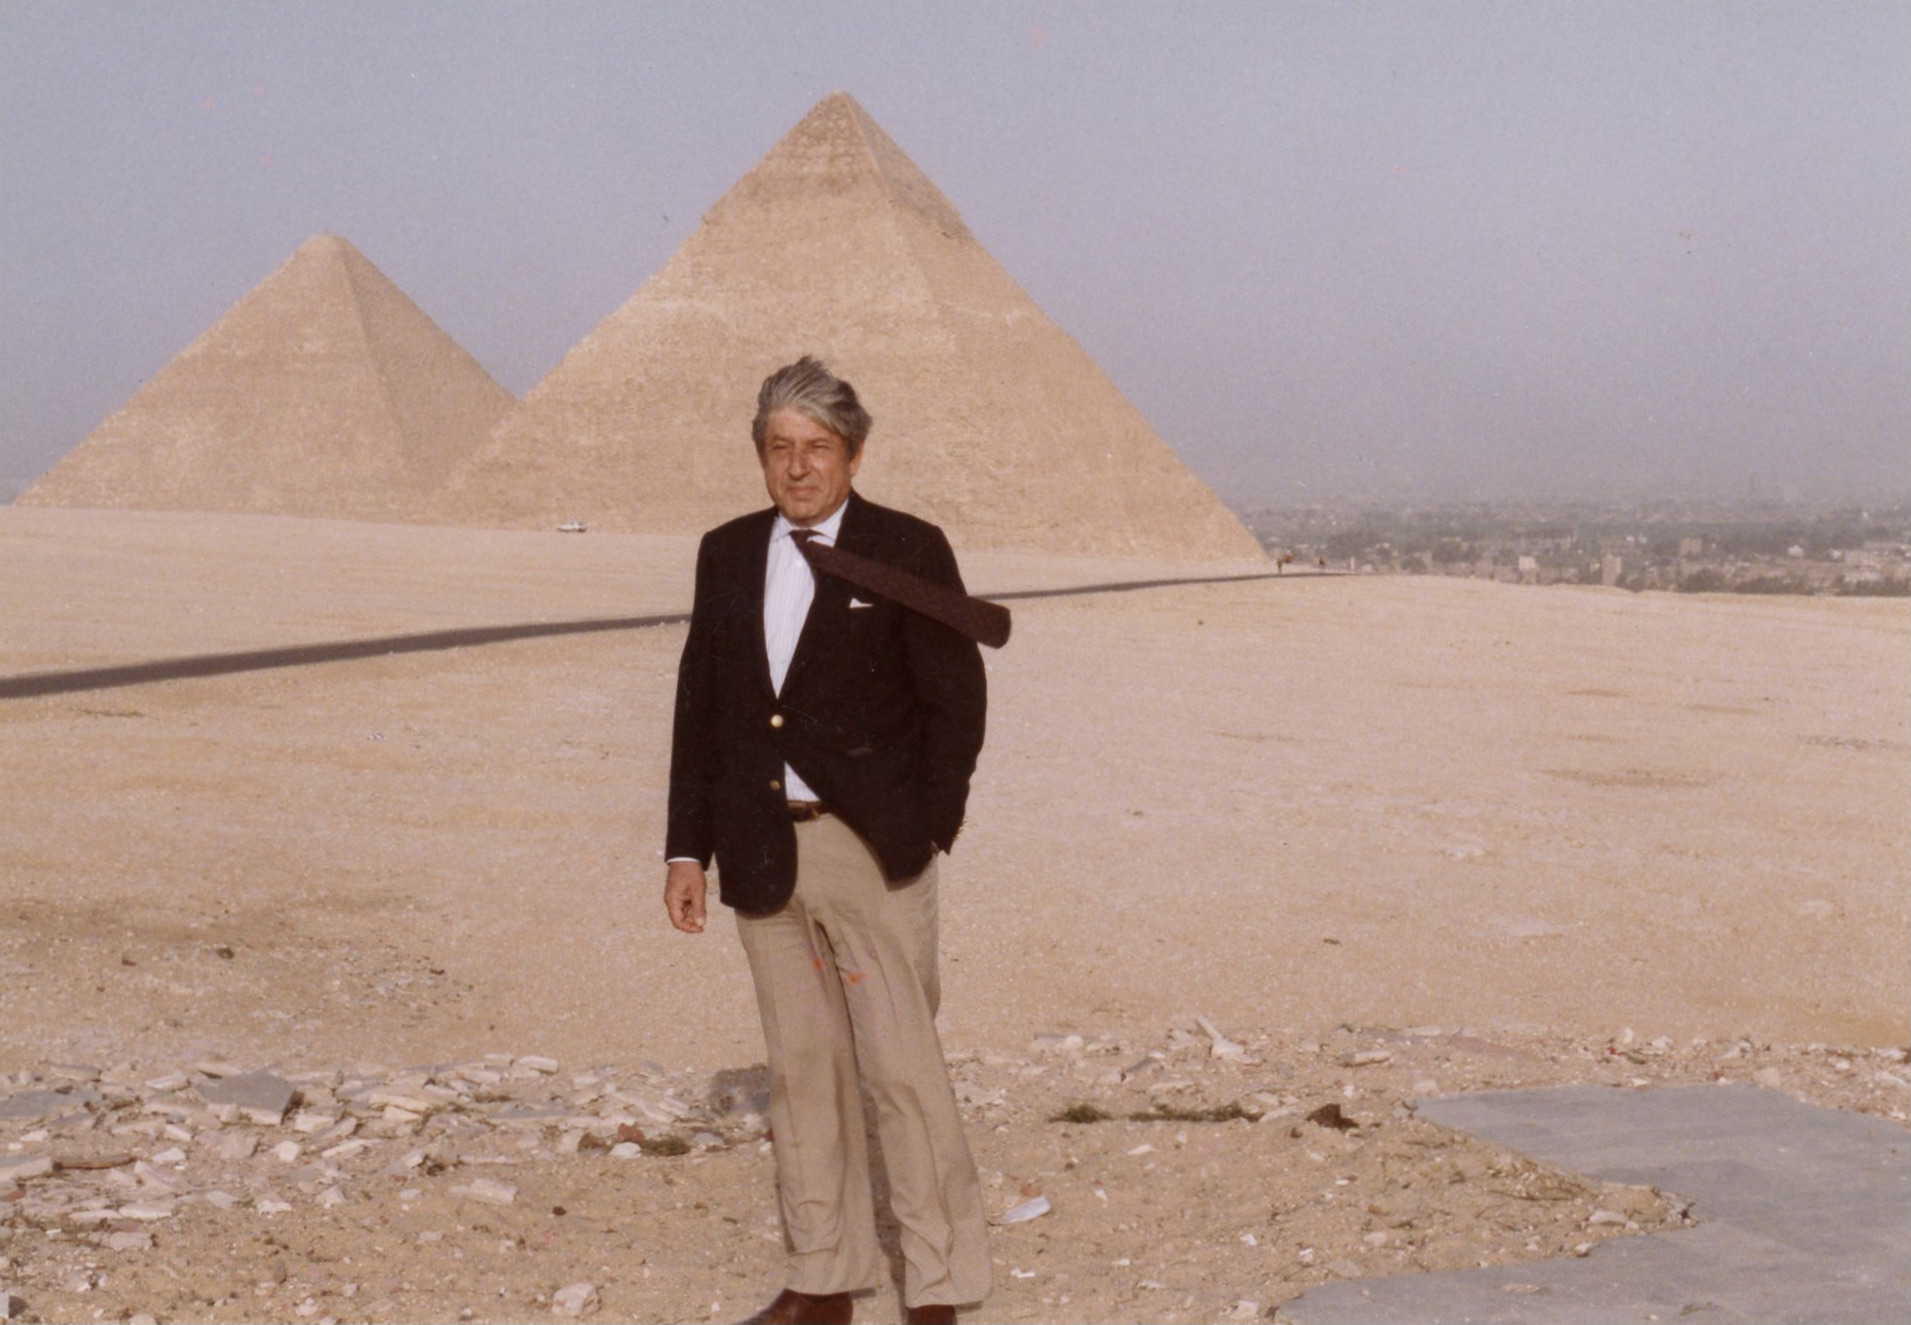 Photo of Walter Ferro in front of pyramids